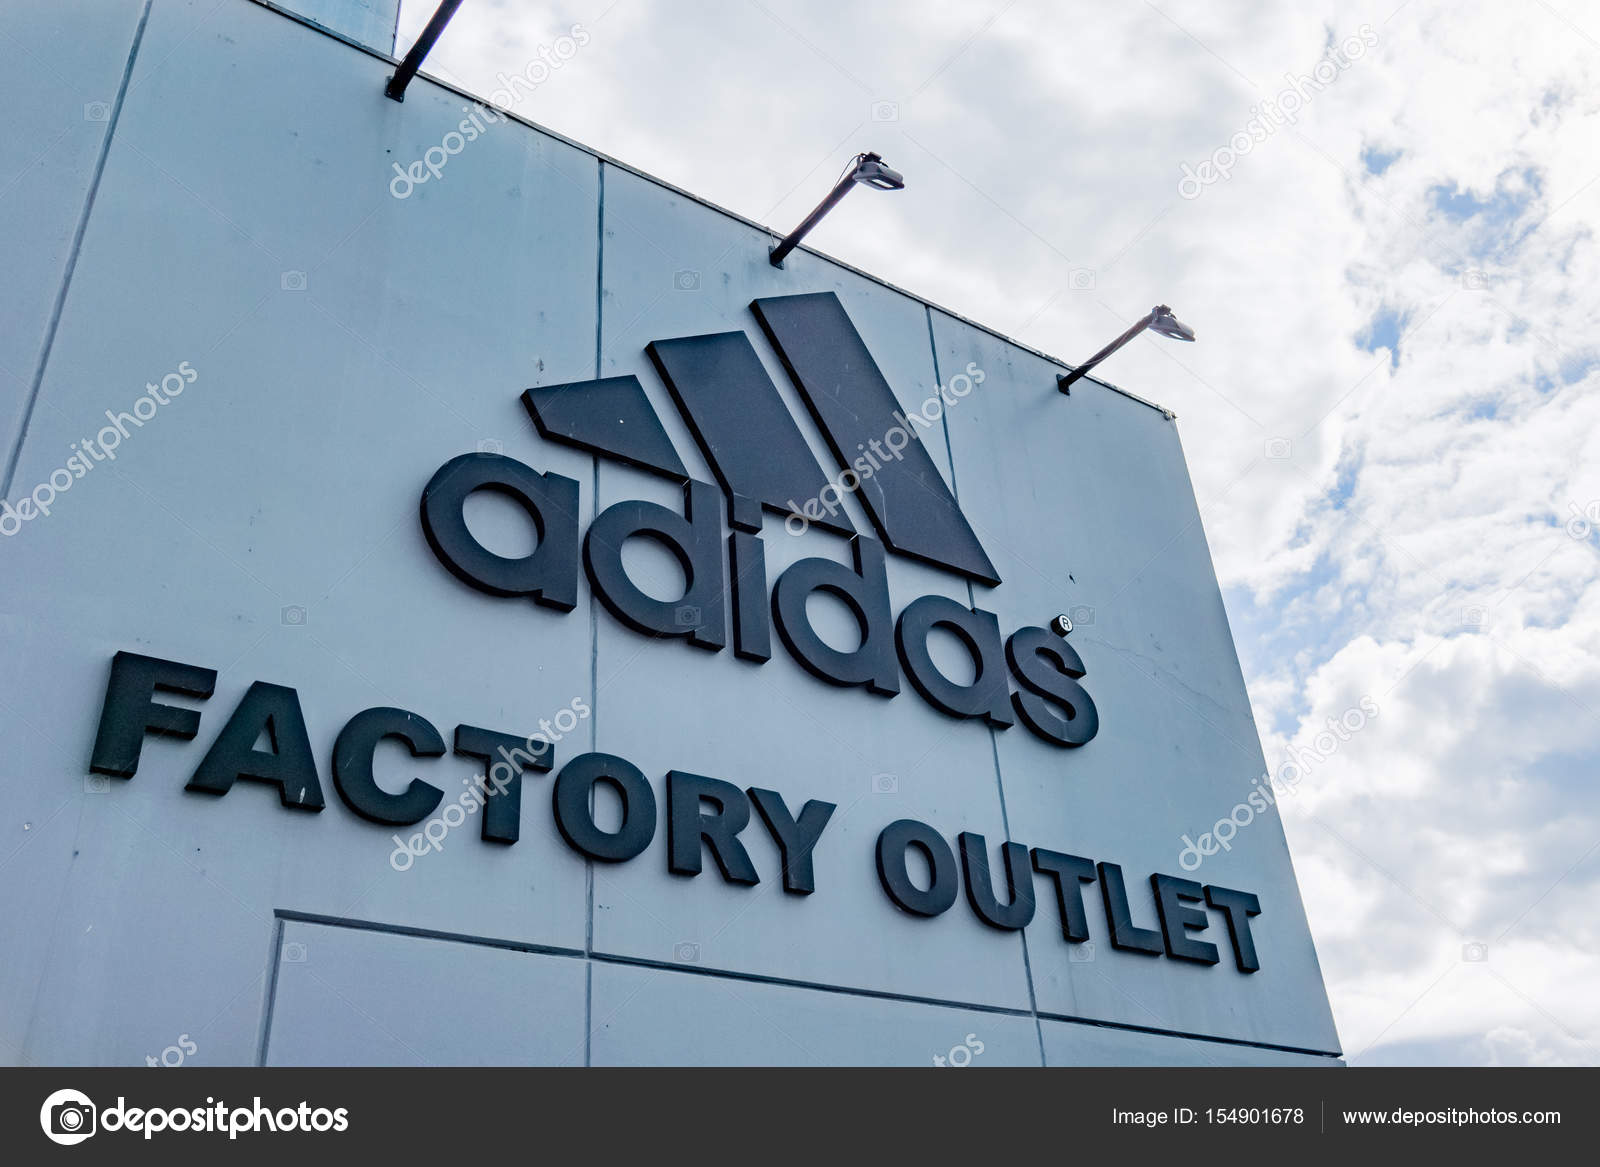 Adidas Factory outlet. Sign aganist the 